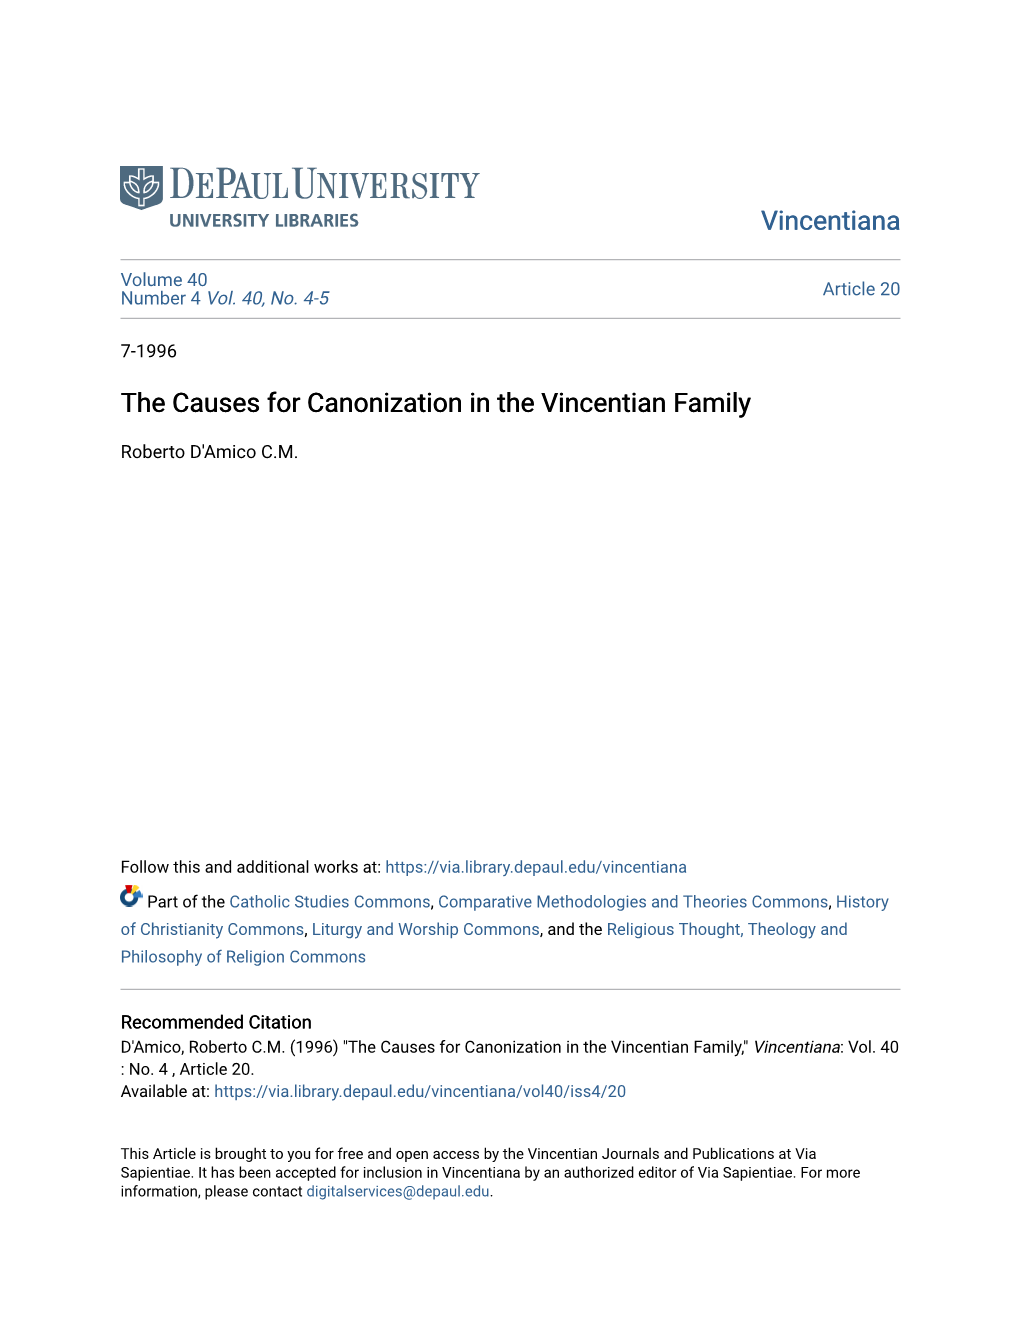 The Causes for Canonization in the Vincentian Family